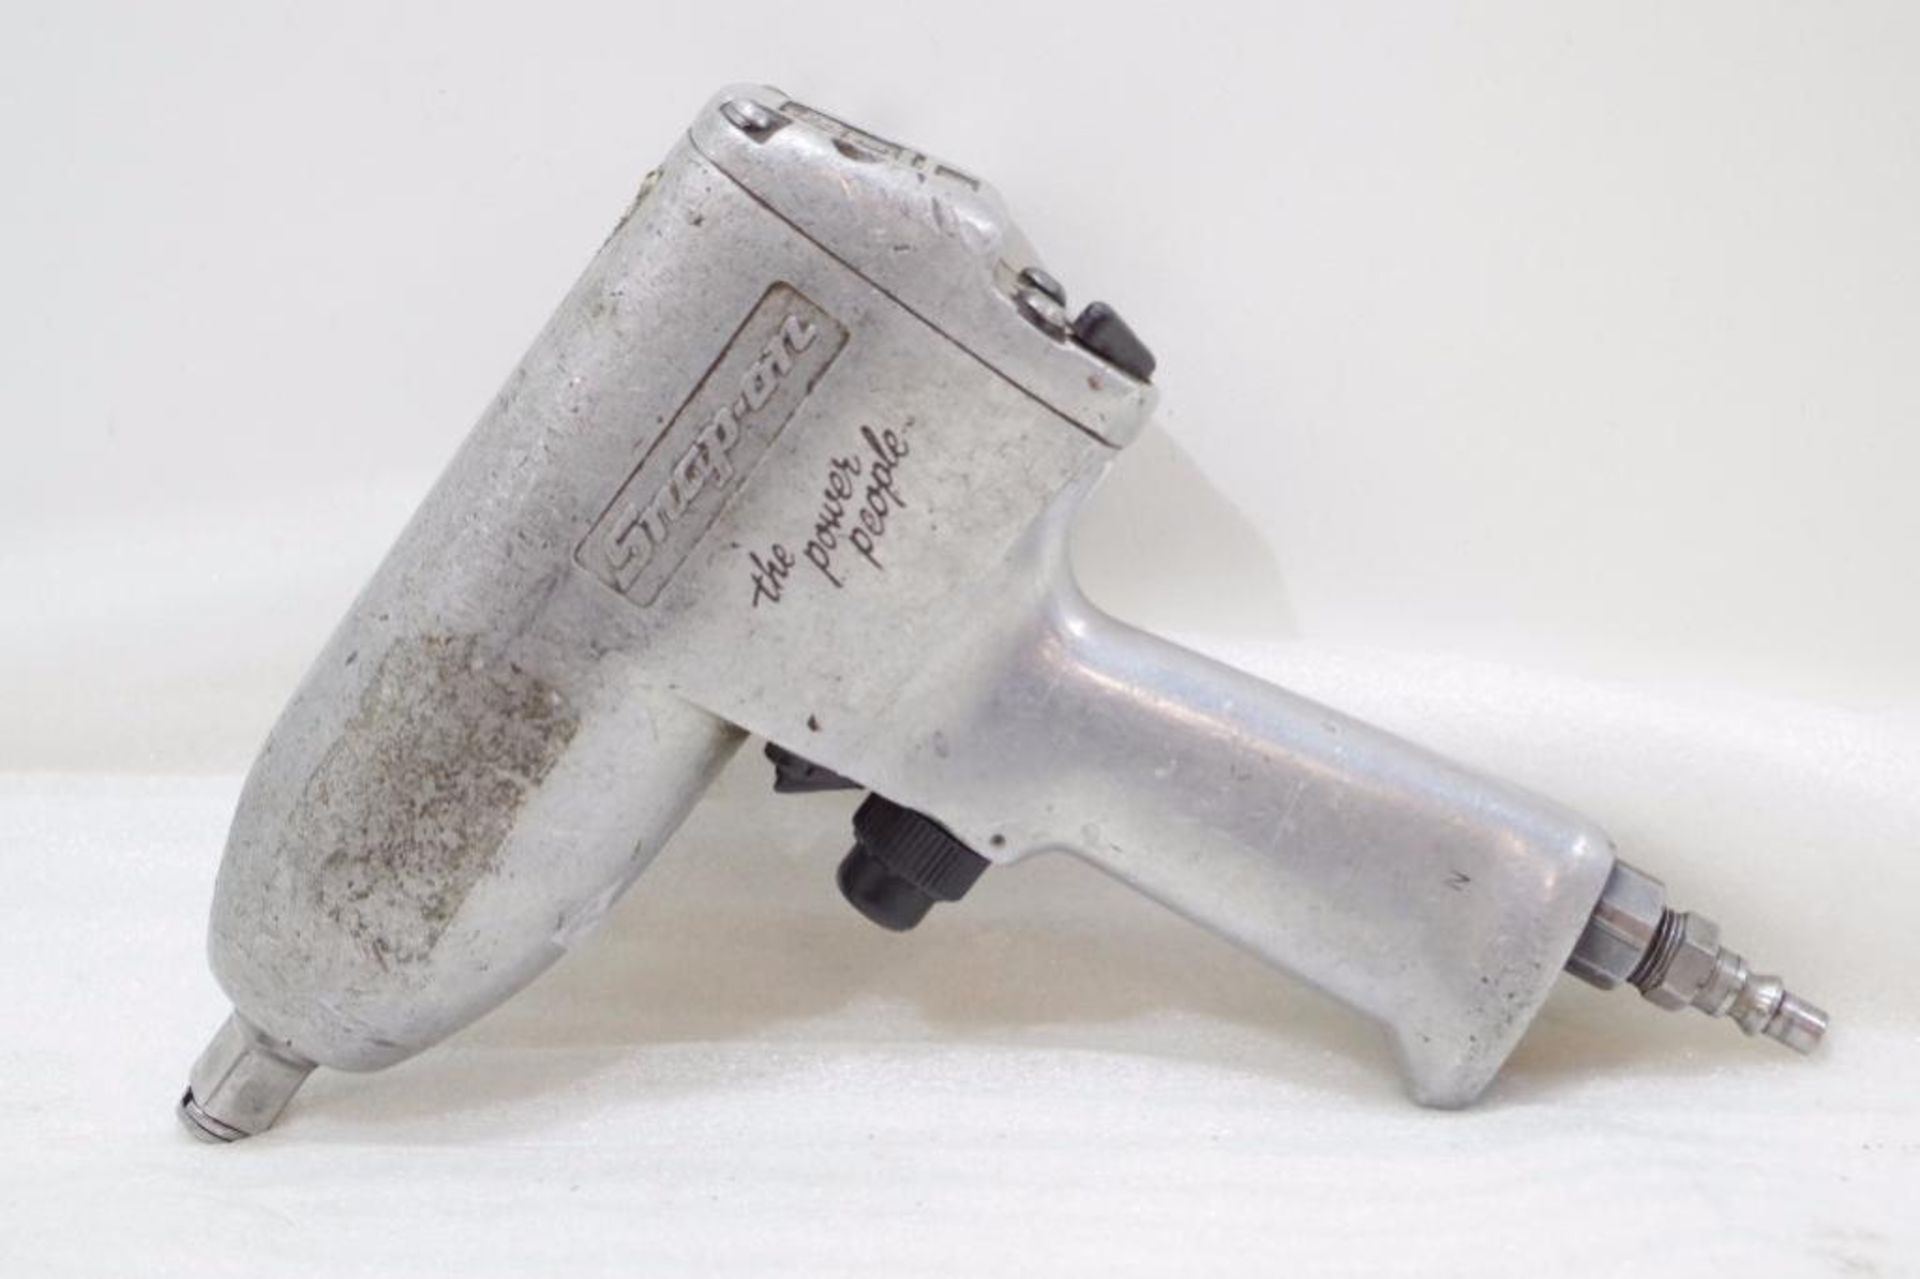 SNAP-ON 1/2" Air Impact Wrench, M/N IM51A, Made in USA - Image 2 of 4